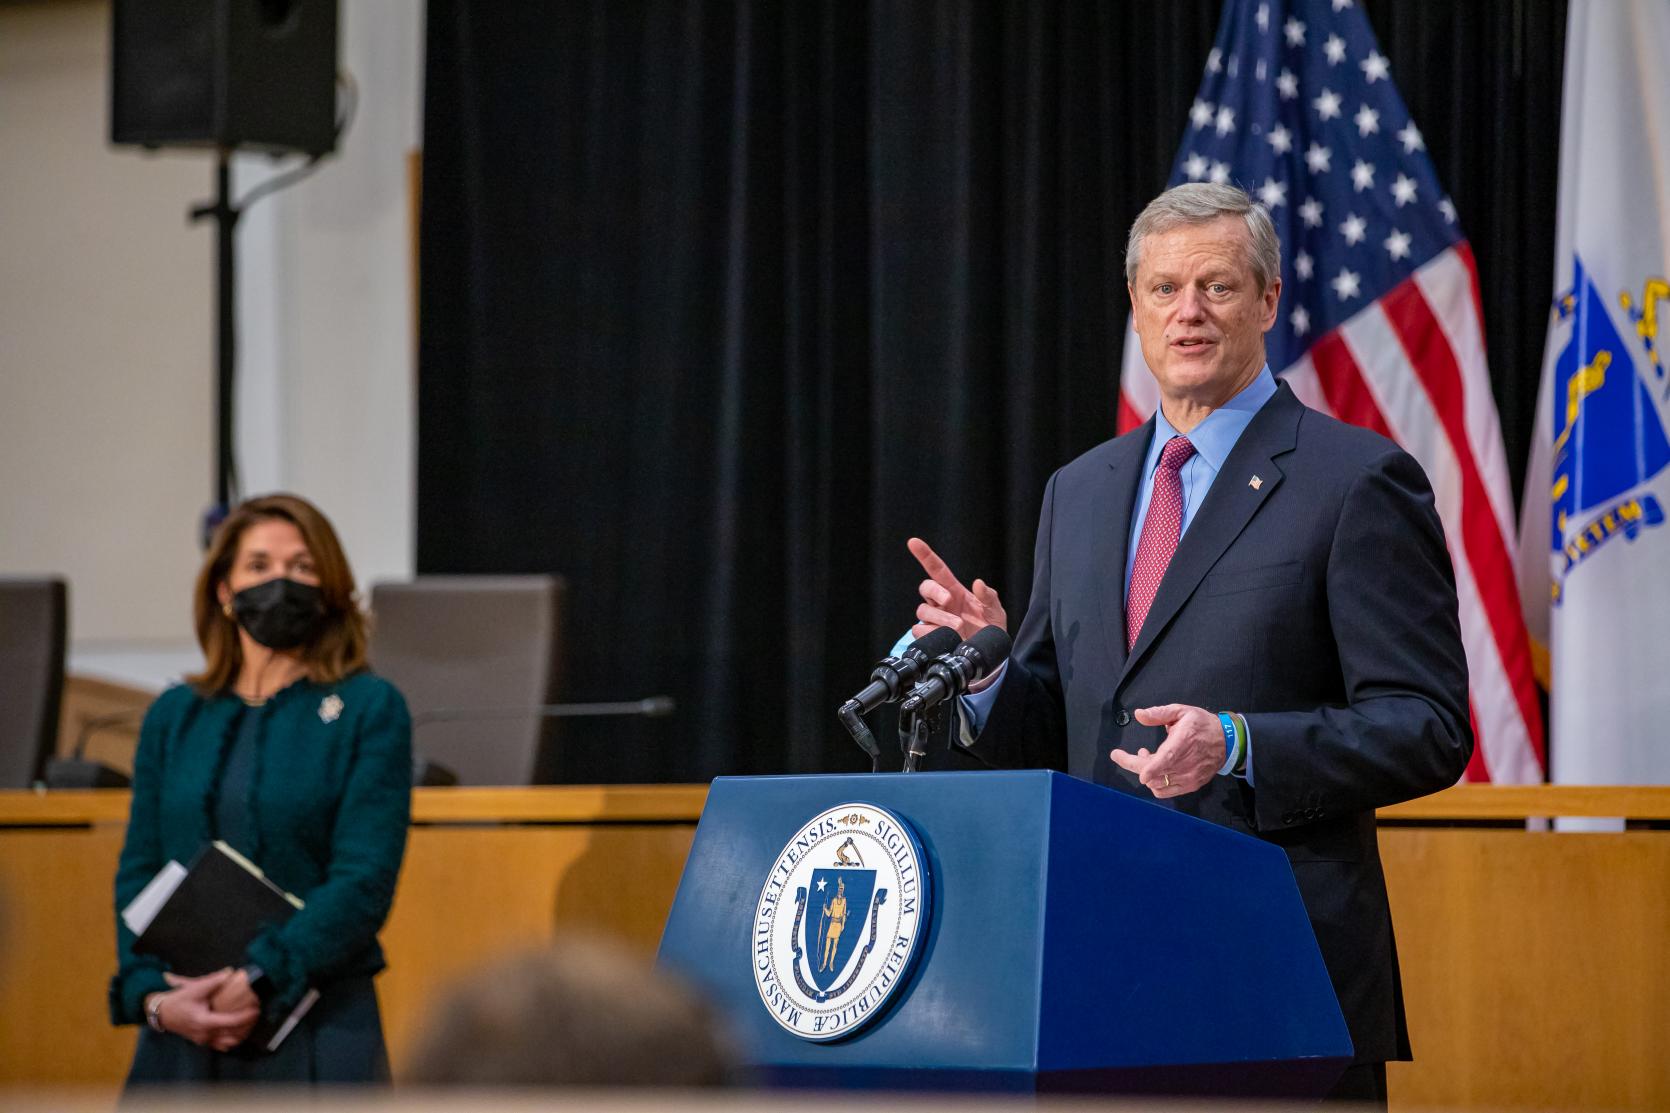 Baker-Polito Administration Announces Further Measures to Stop the Spread of COVID-19